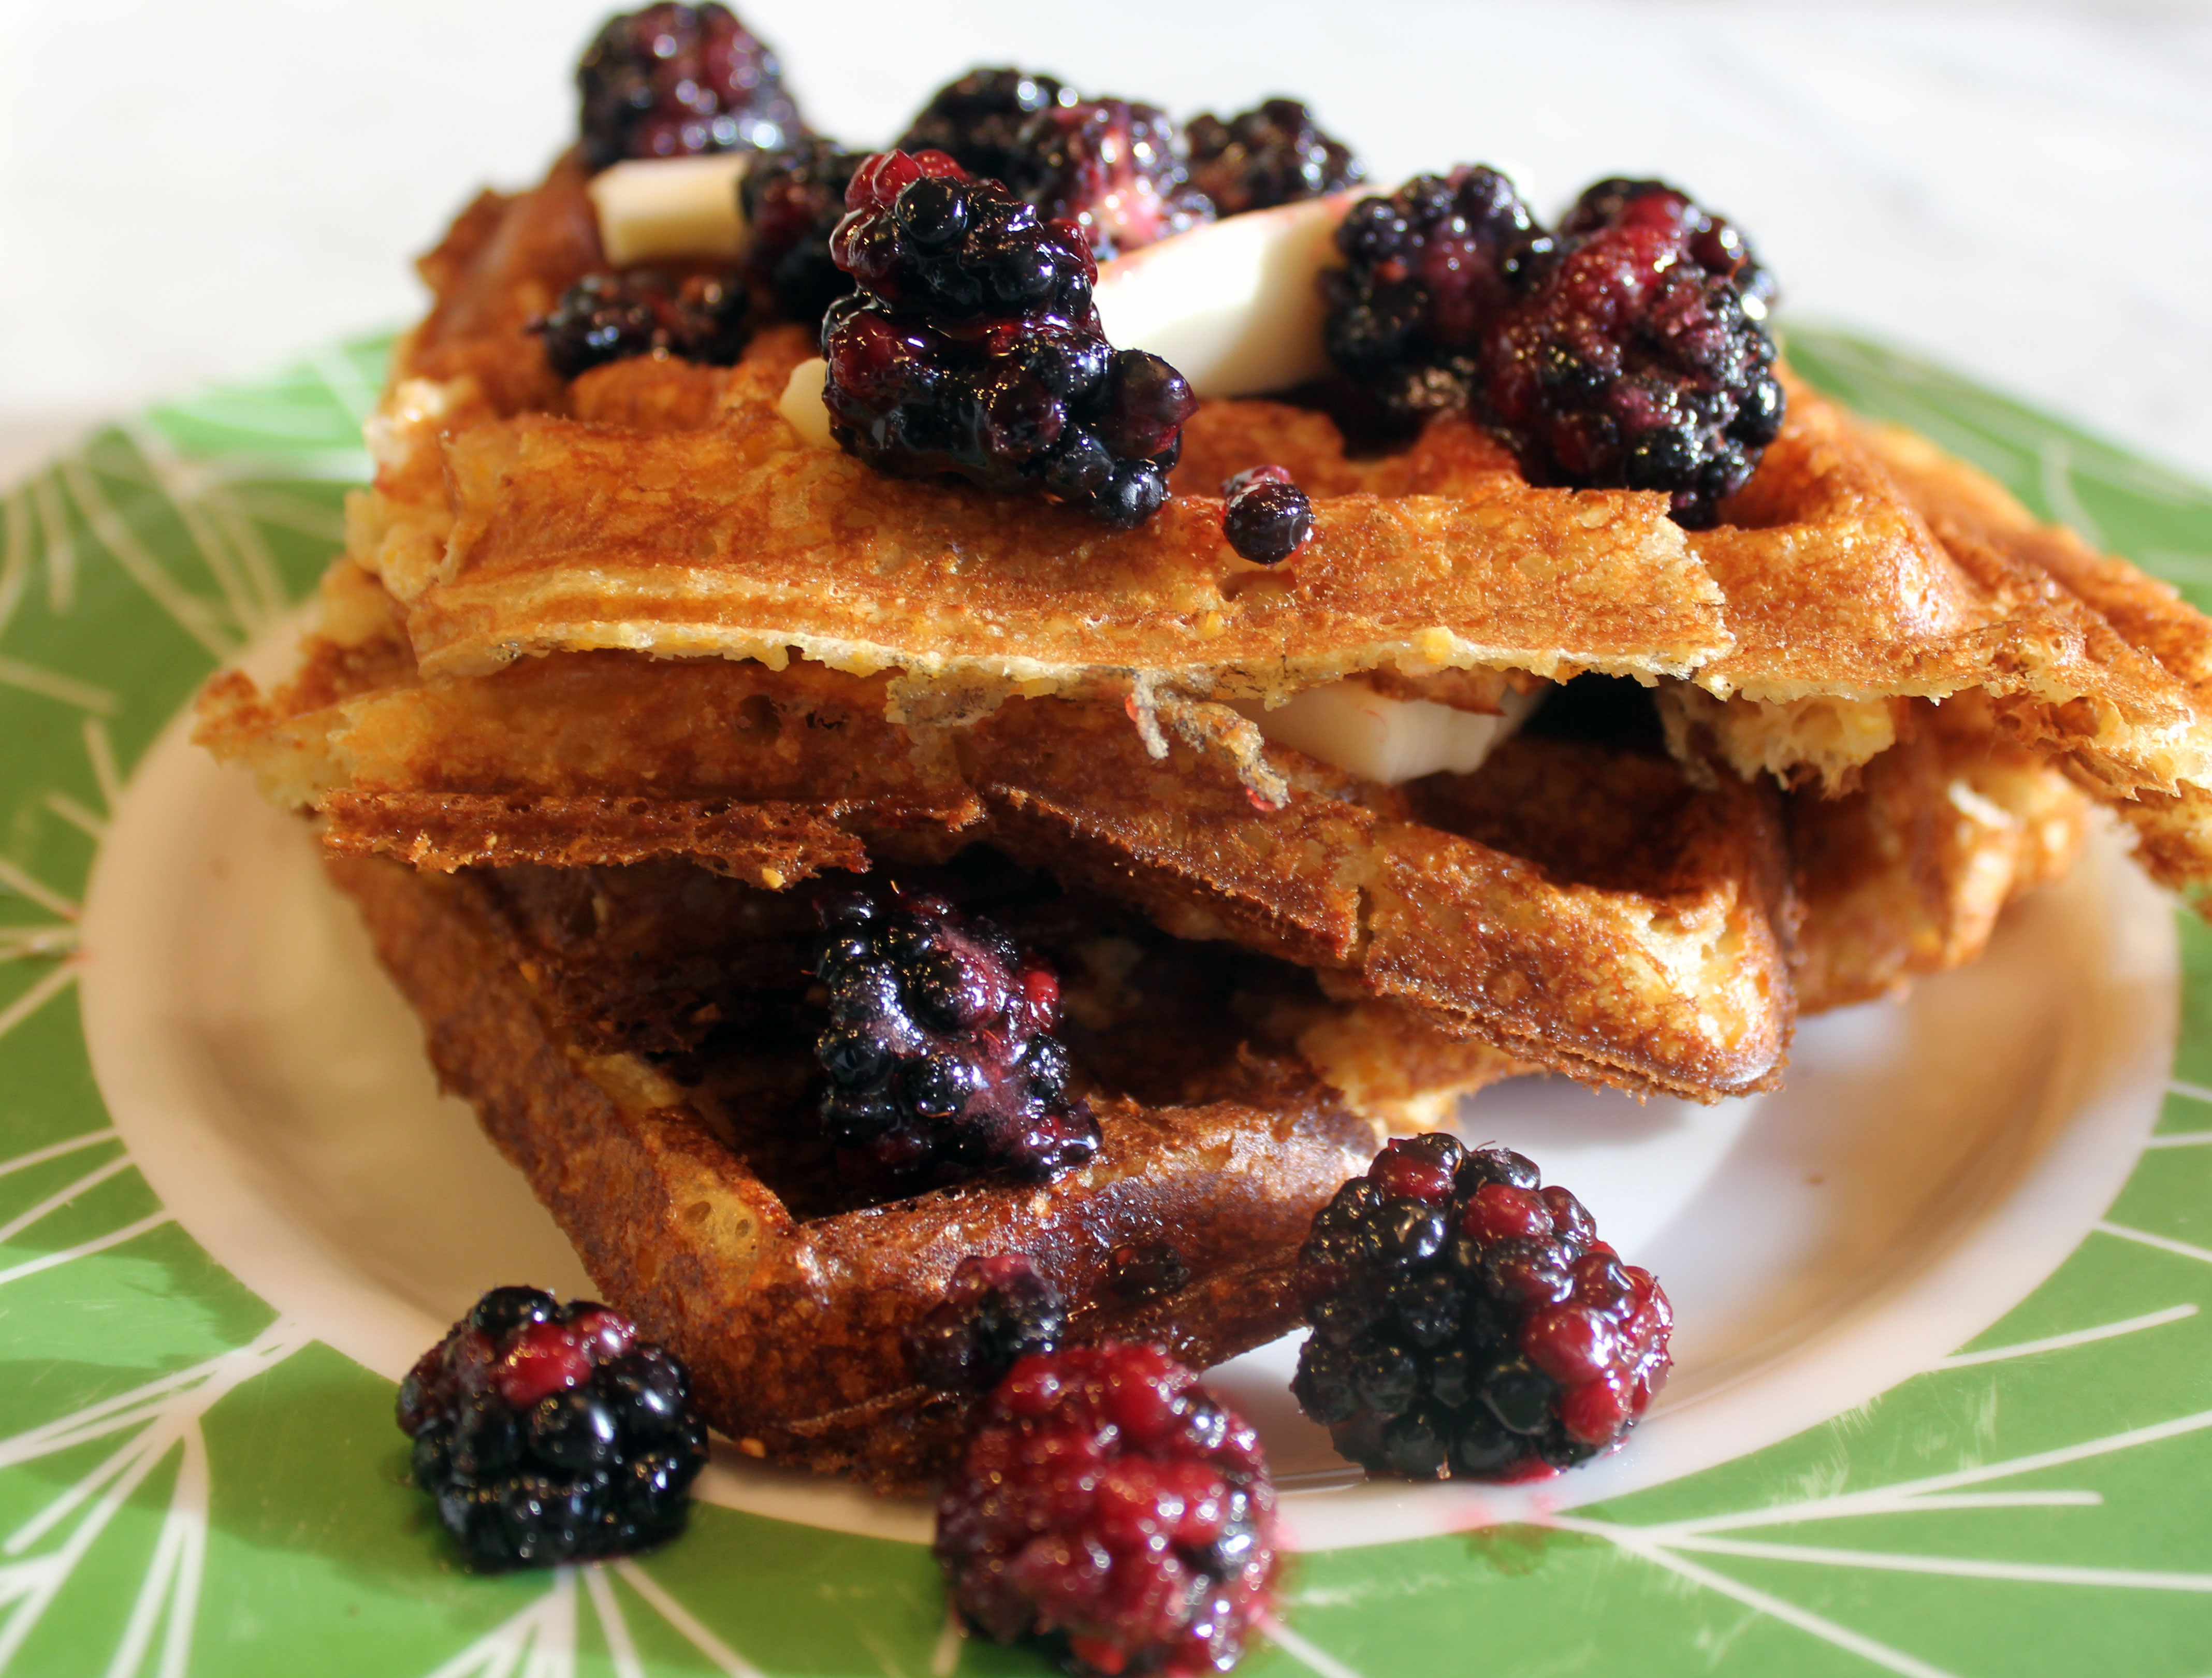 TBT Recipe: Crispy Cornmeal Waffles with Buttermilk and Maple Syrup